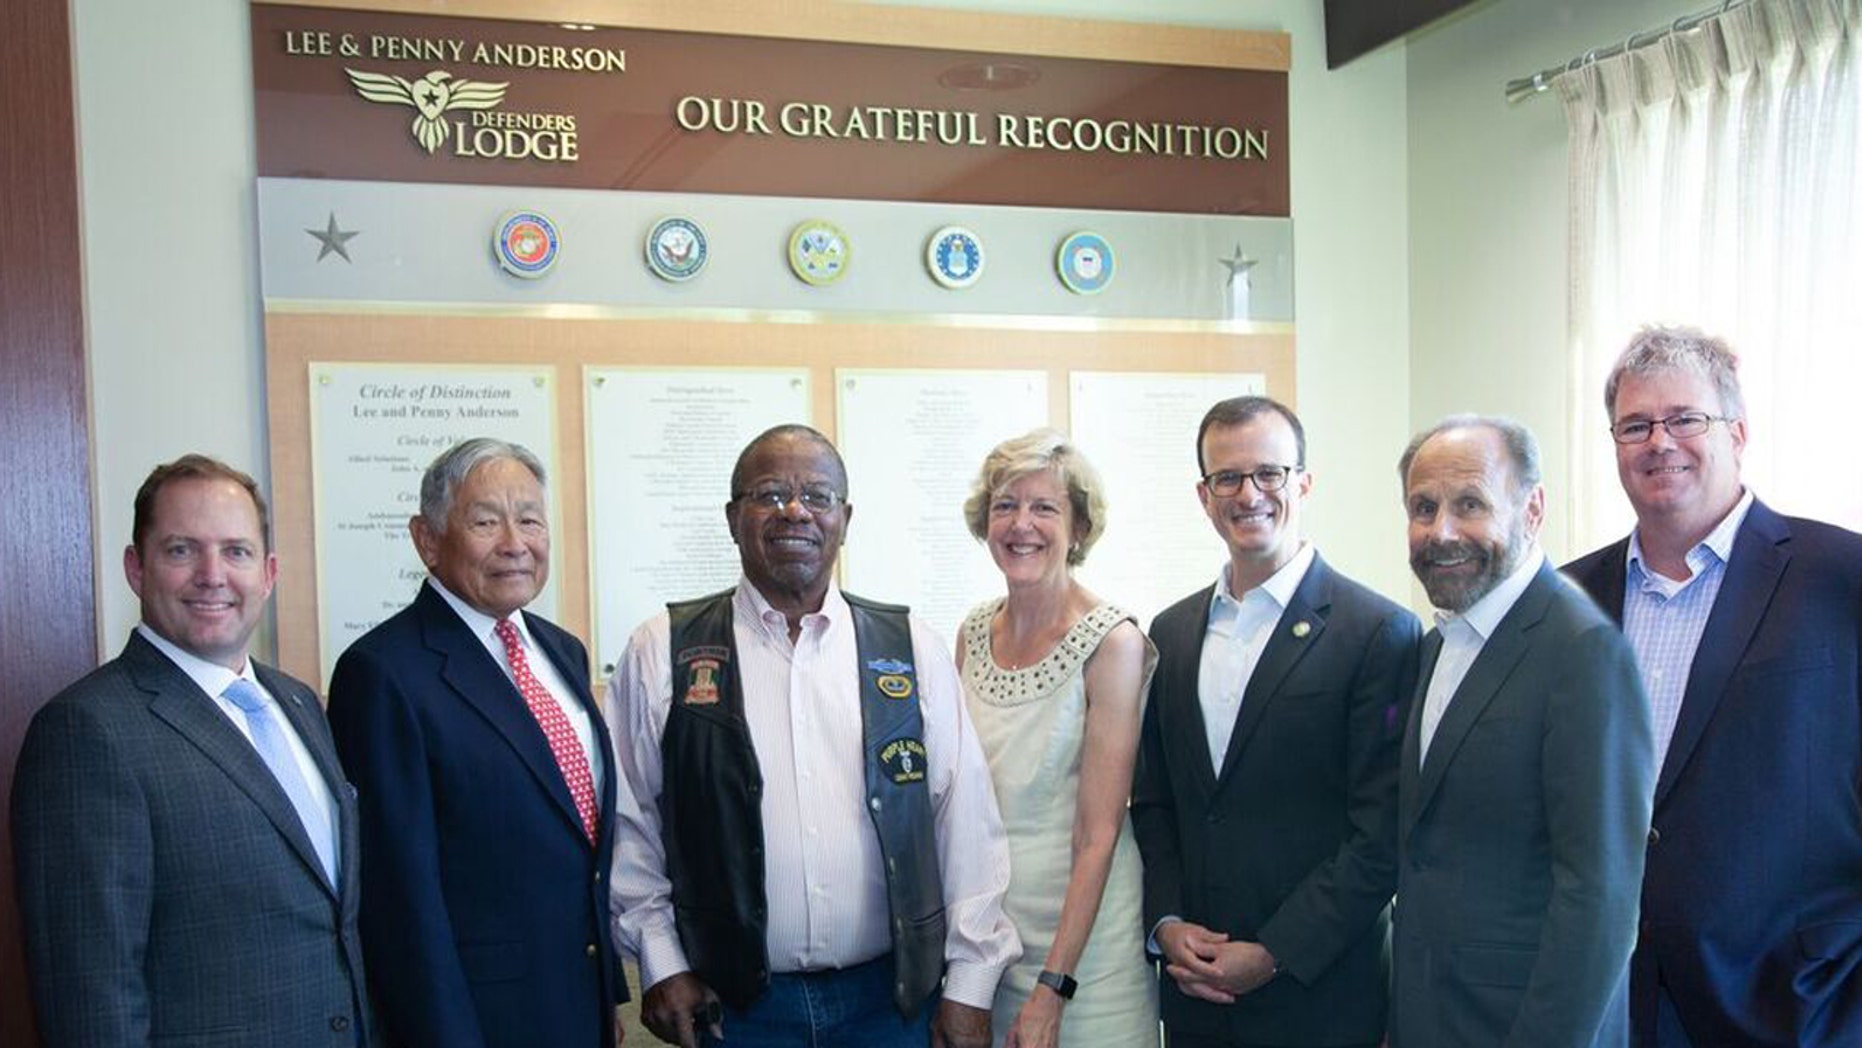 James Schenck, President and CEO of PenFed Credit Union; Honorable Frederick F.Y. Pang, Chairman of the PenFed Foundation, Billy Bryels, Veteran; Lisa Freeman, former Director/CEO, VA Palo Alto Health Care System; Assembly Member Marc Berman (24th District); State Senator Jerry Hill (13th District); William Ball, Chief, Voluntary &amp; Hospital Services, VA Palo Alto Health Care System at the Lee &amp; Penny Anderson Defenders Lodge.